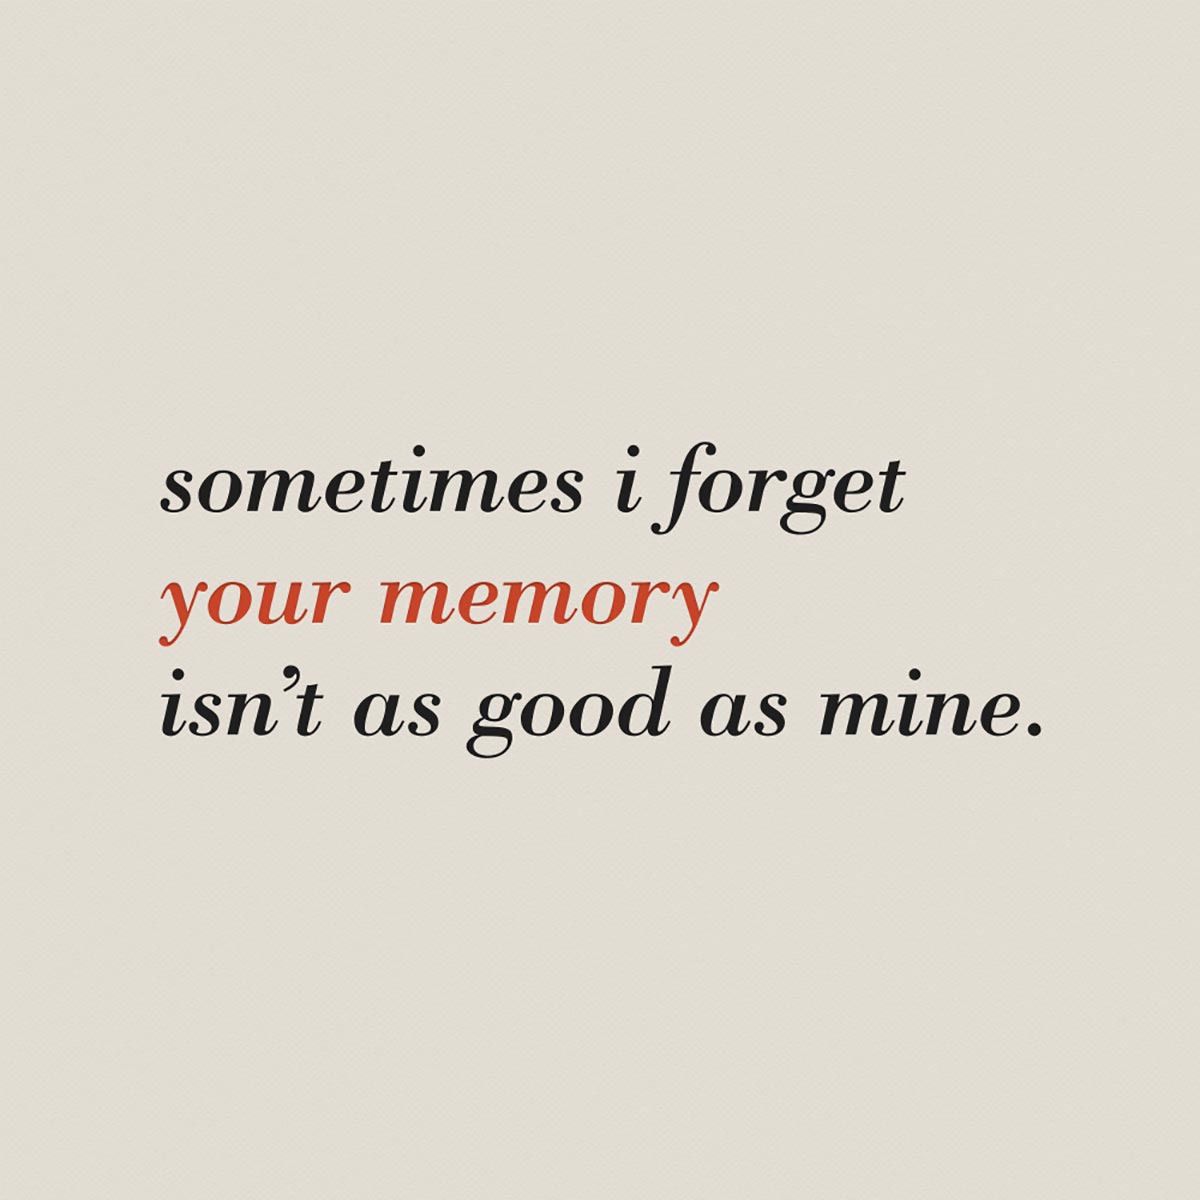 yourmemory